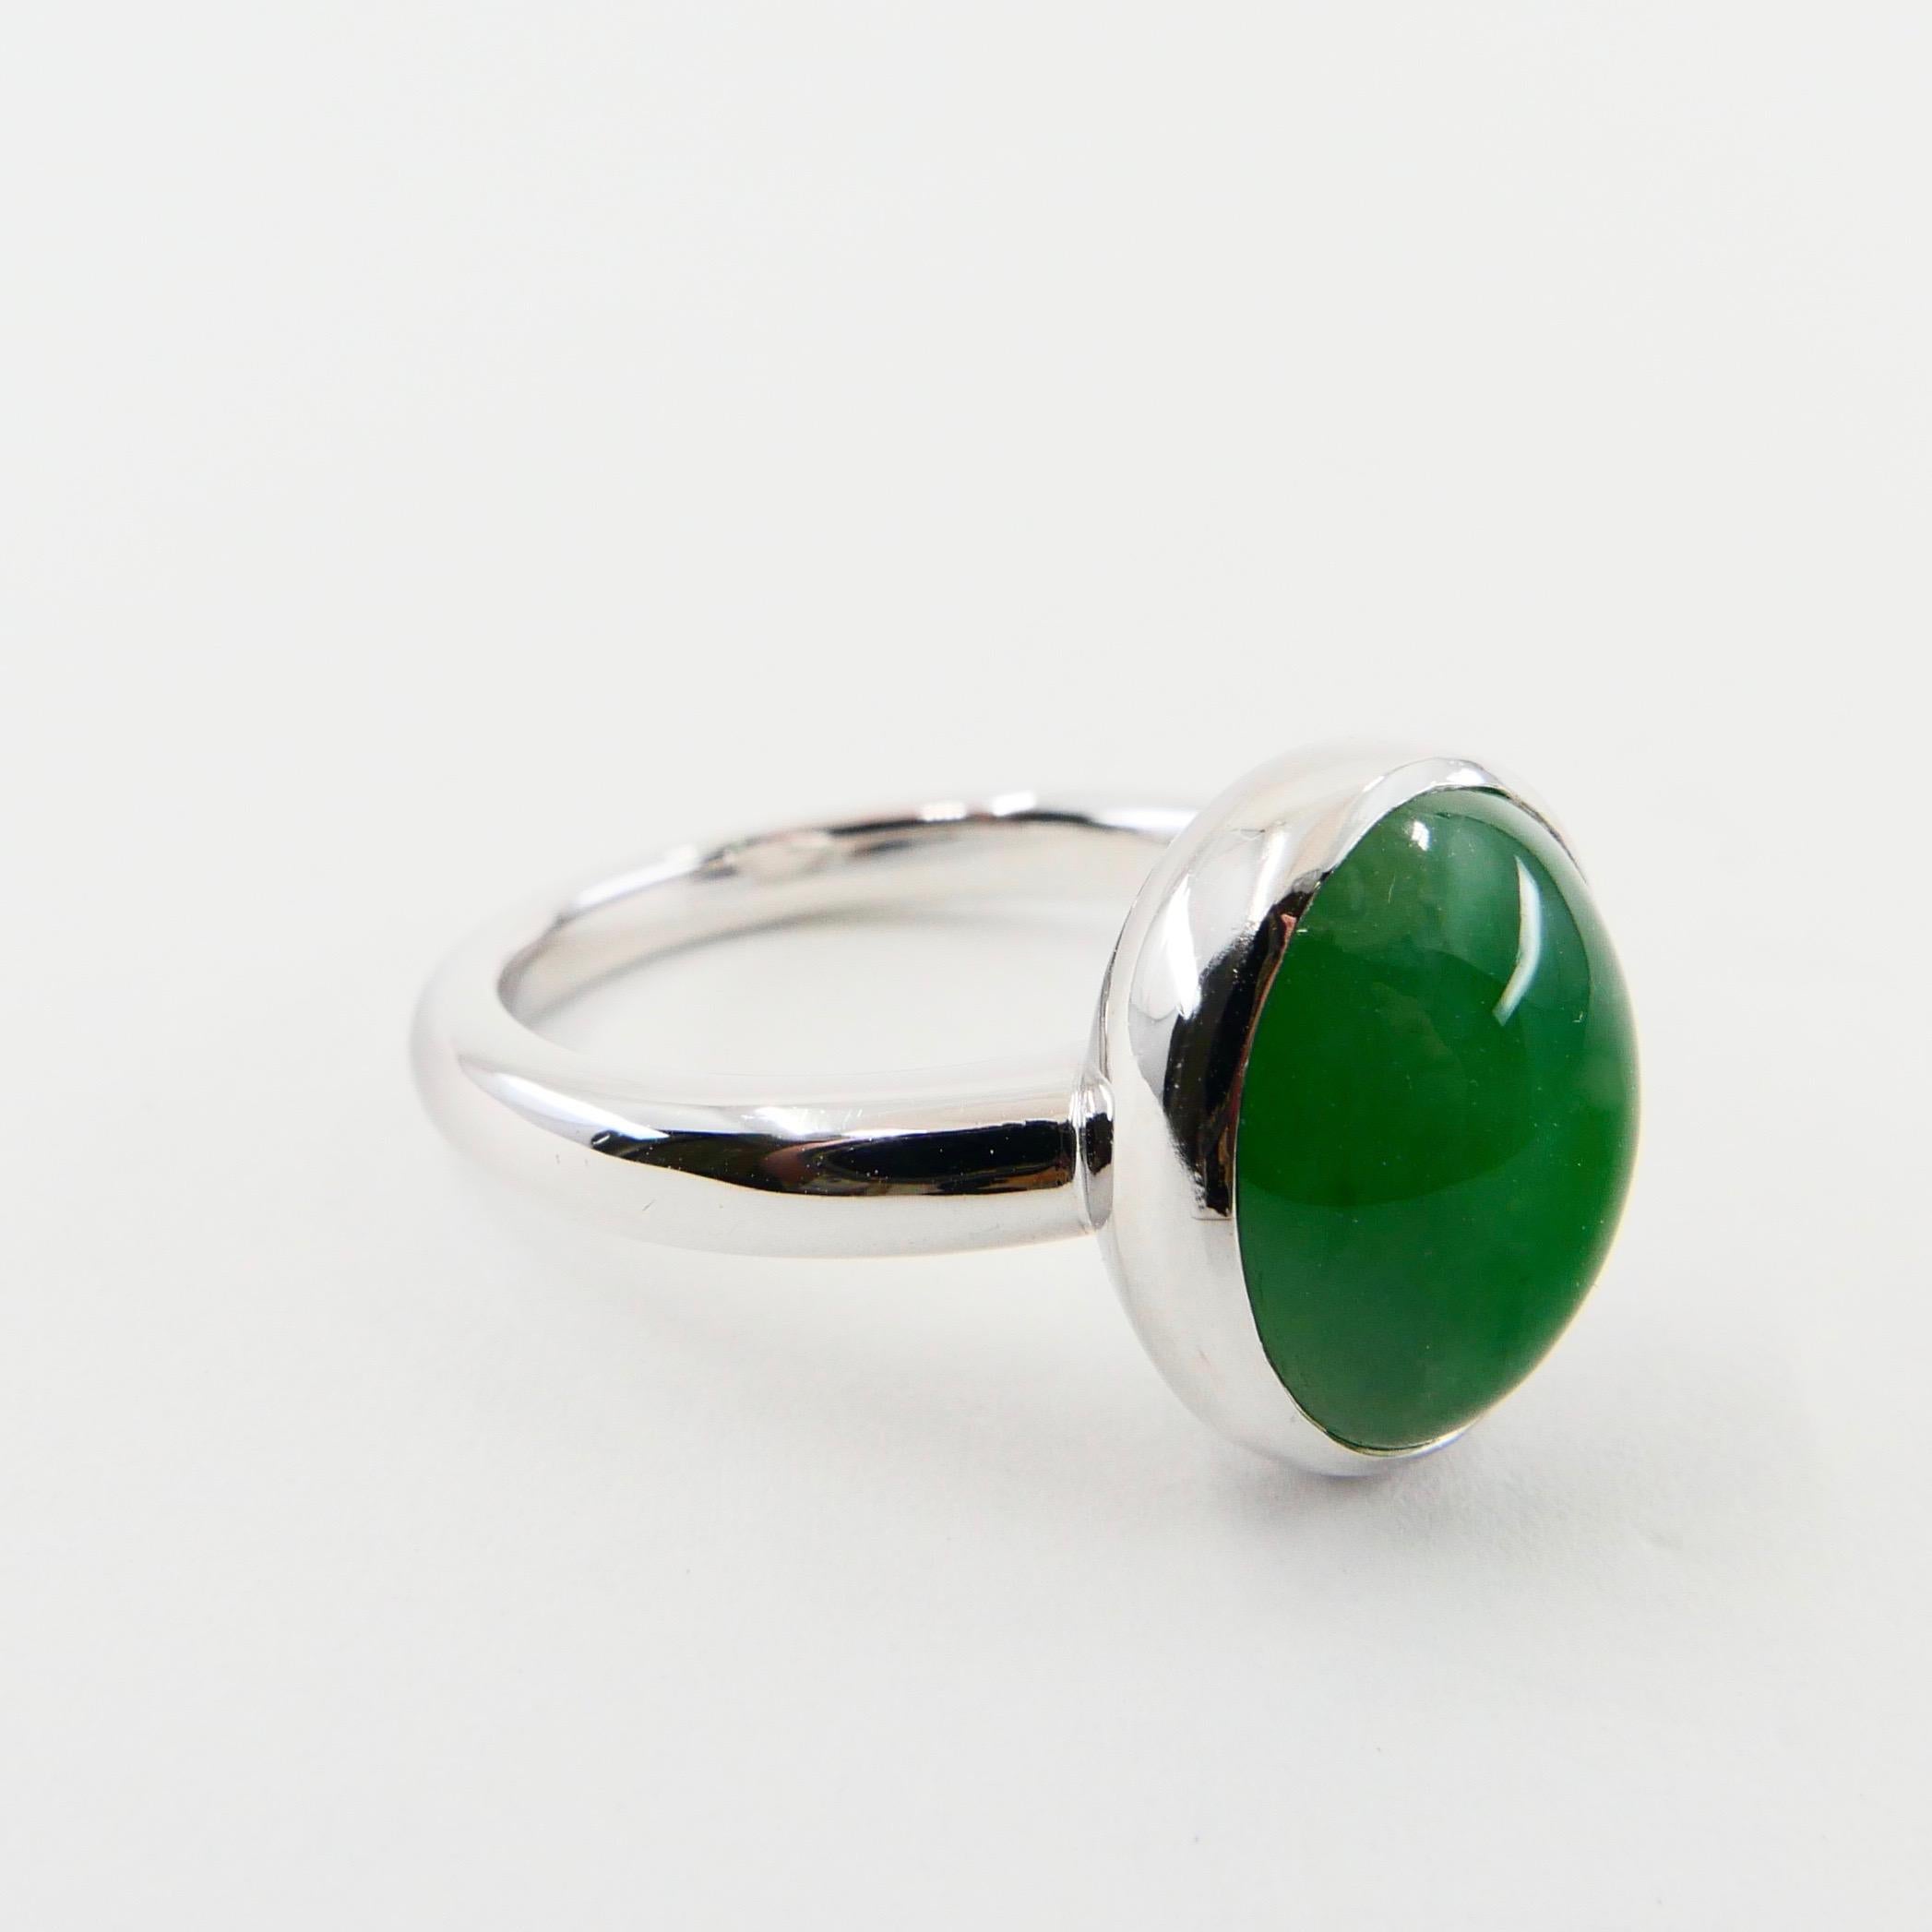 Certified Natural Type A Jadeite Jade Ring, Apple Green Color, Unisex For Sale 3